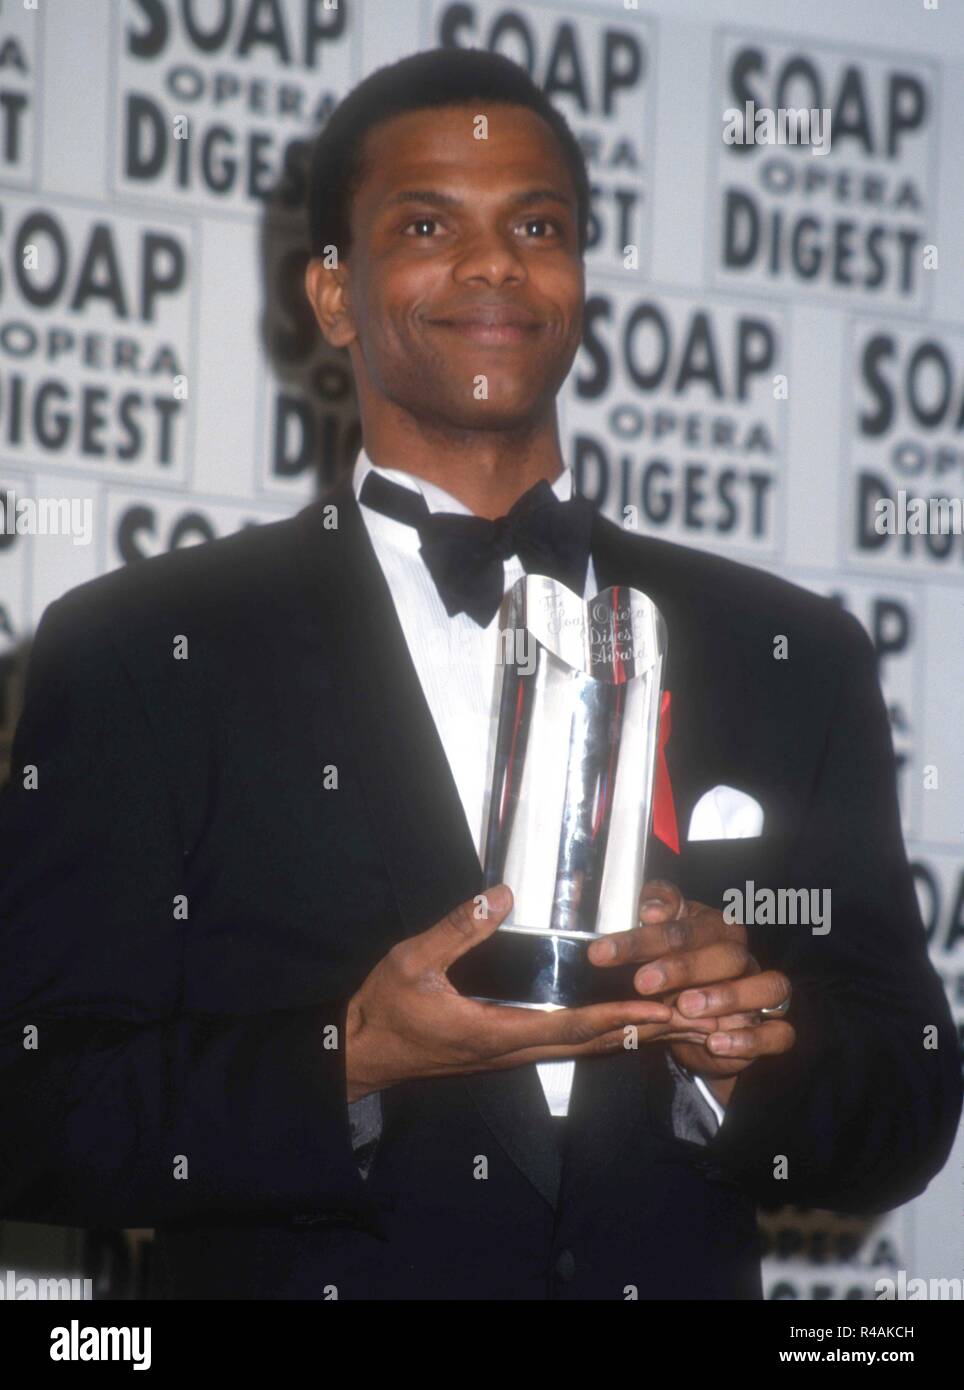 BEVERLY HILLS, CA - FEBRUARY 26: Actor Monti Sharp attends the Ninth Annual Soap Opera Digest Awards on February 26, 1993 at the Beverly Hilton Hotel in Beverly Hills, California. Photo by Barry King/Alamy Stock Photo Stock Photo